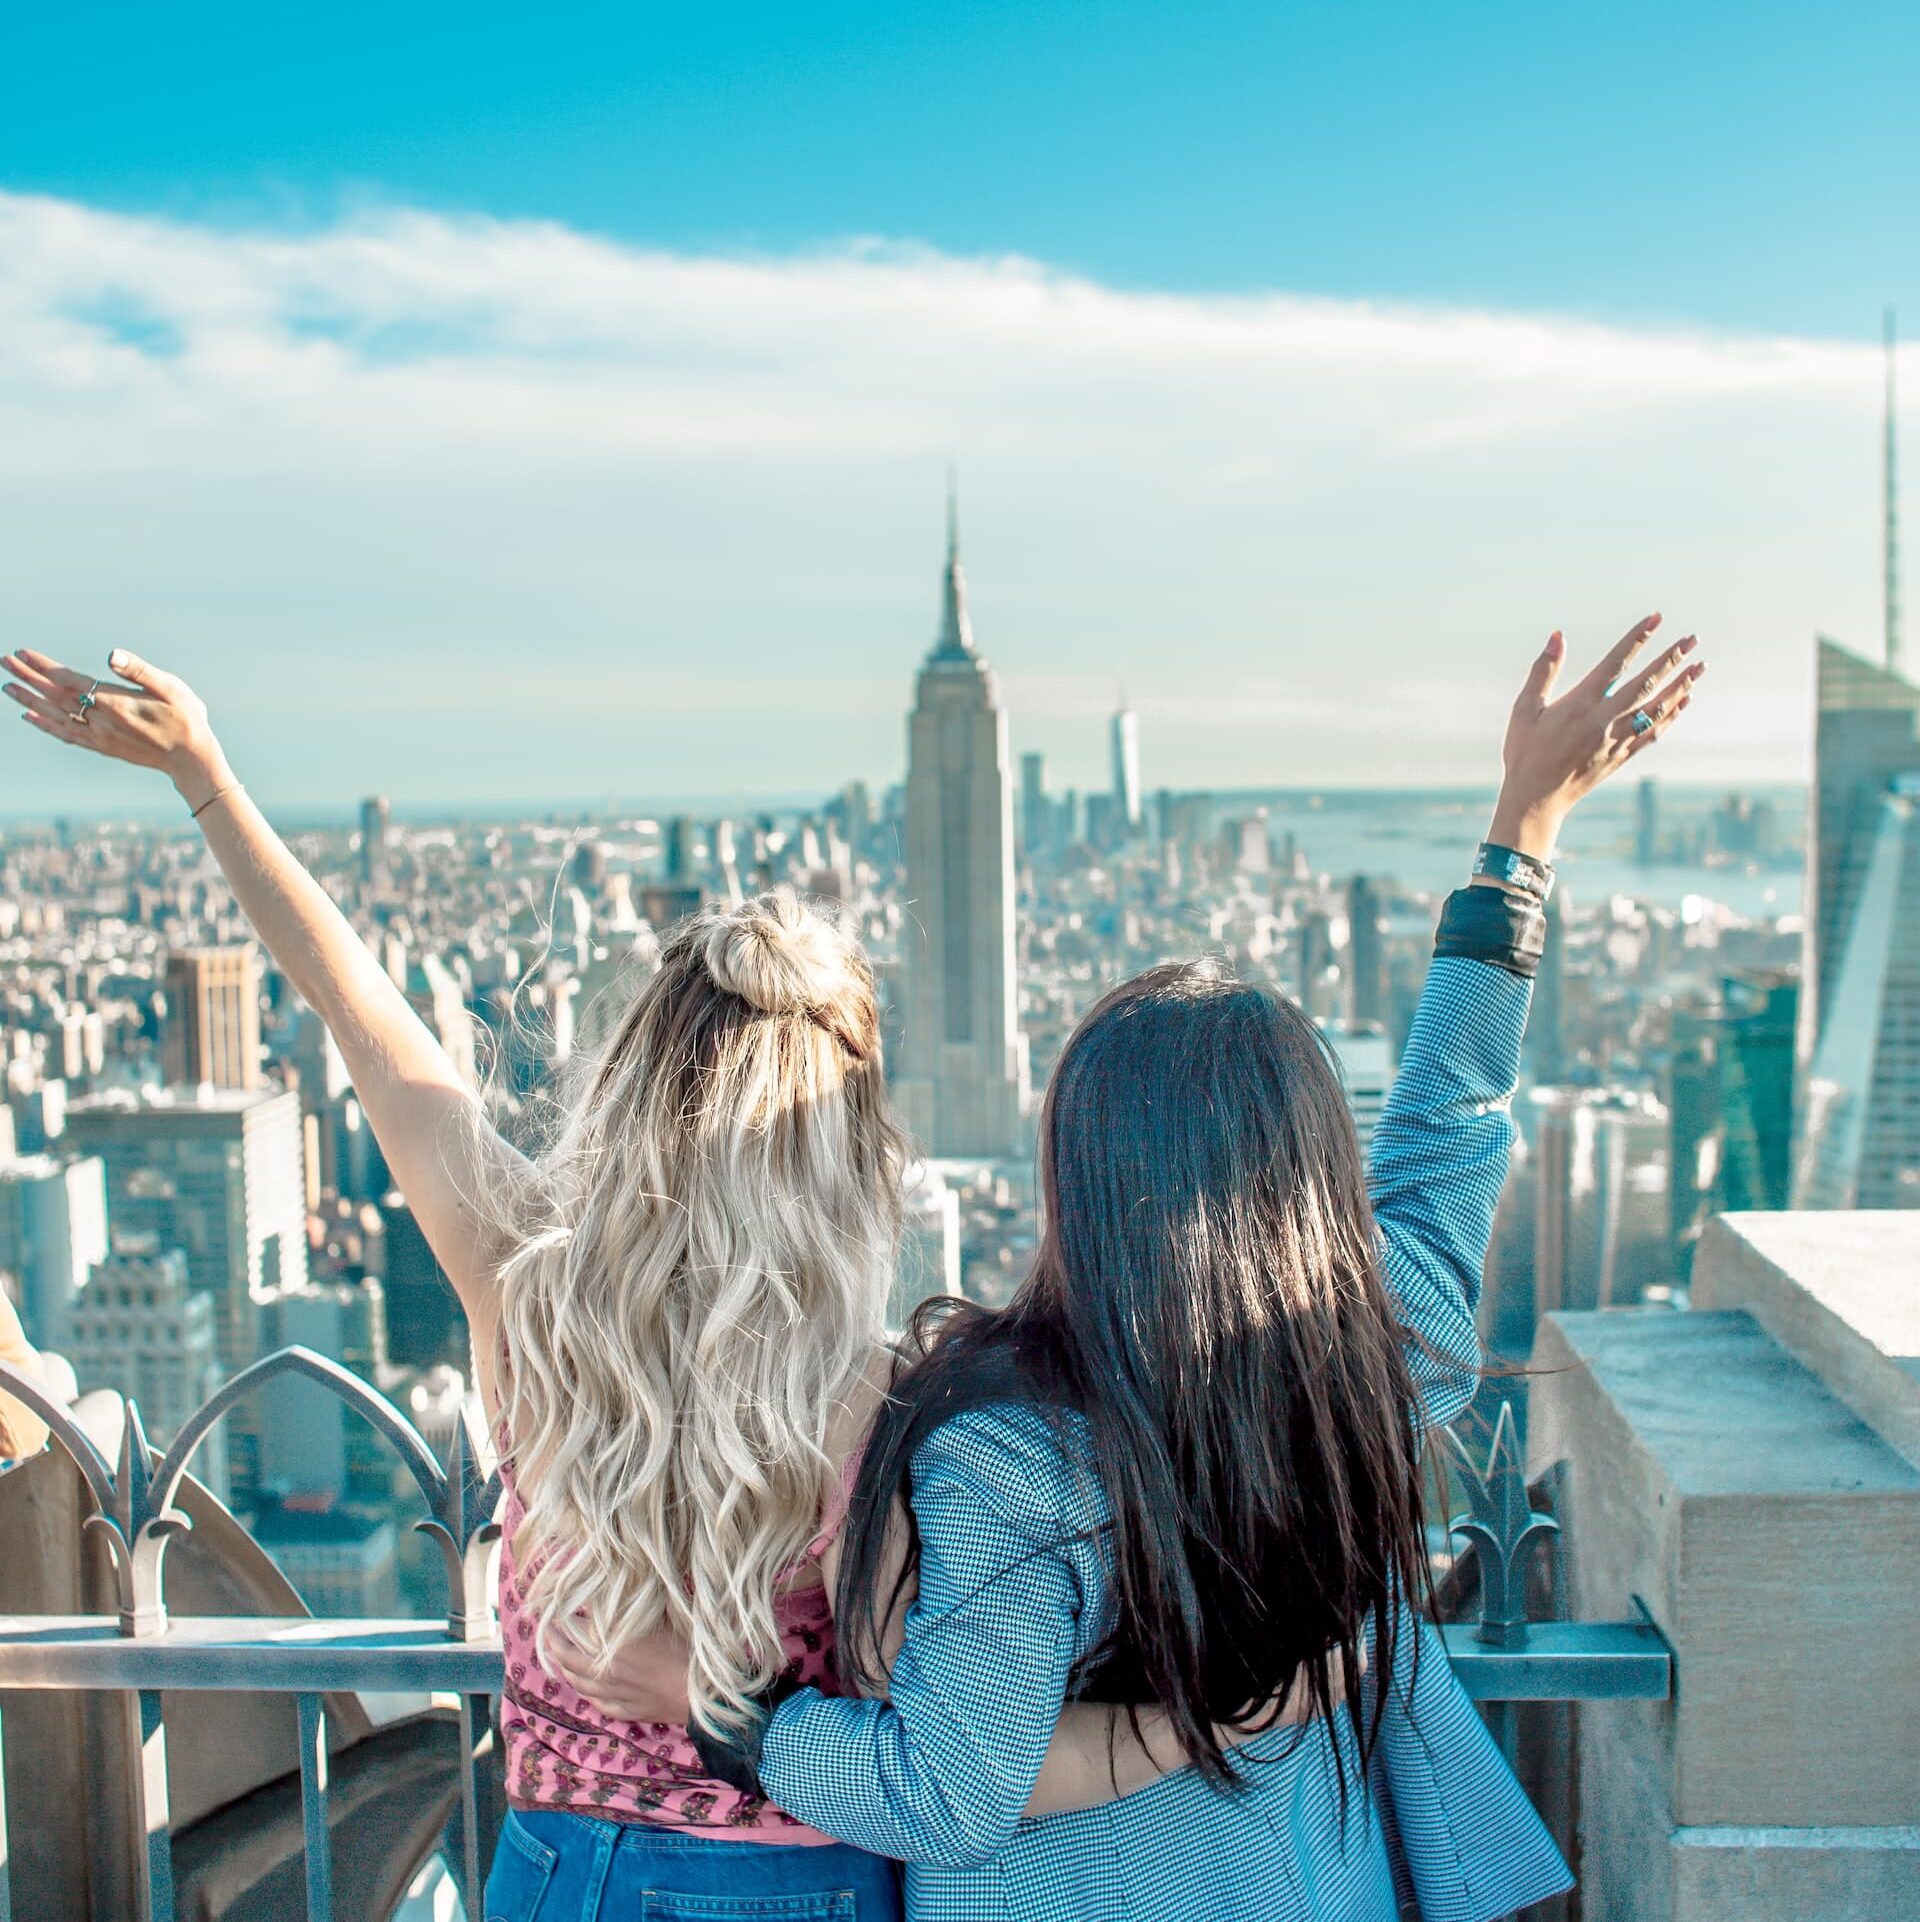 Two au pairs pose in front of the Empire State building in New York City during their au pair stay in America.